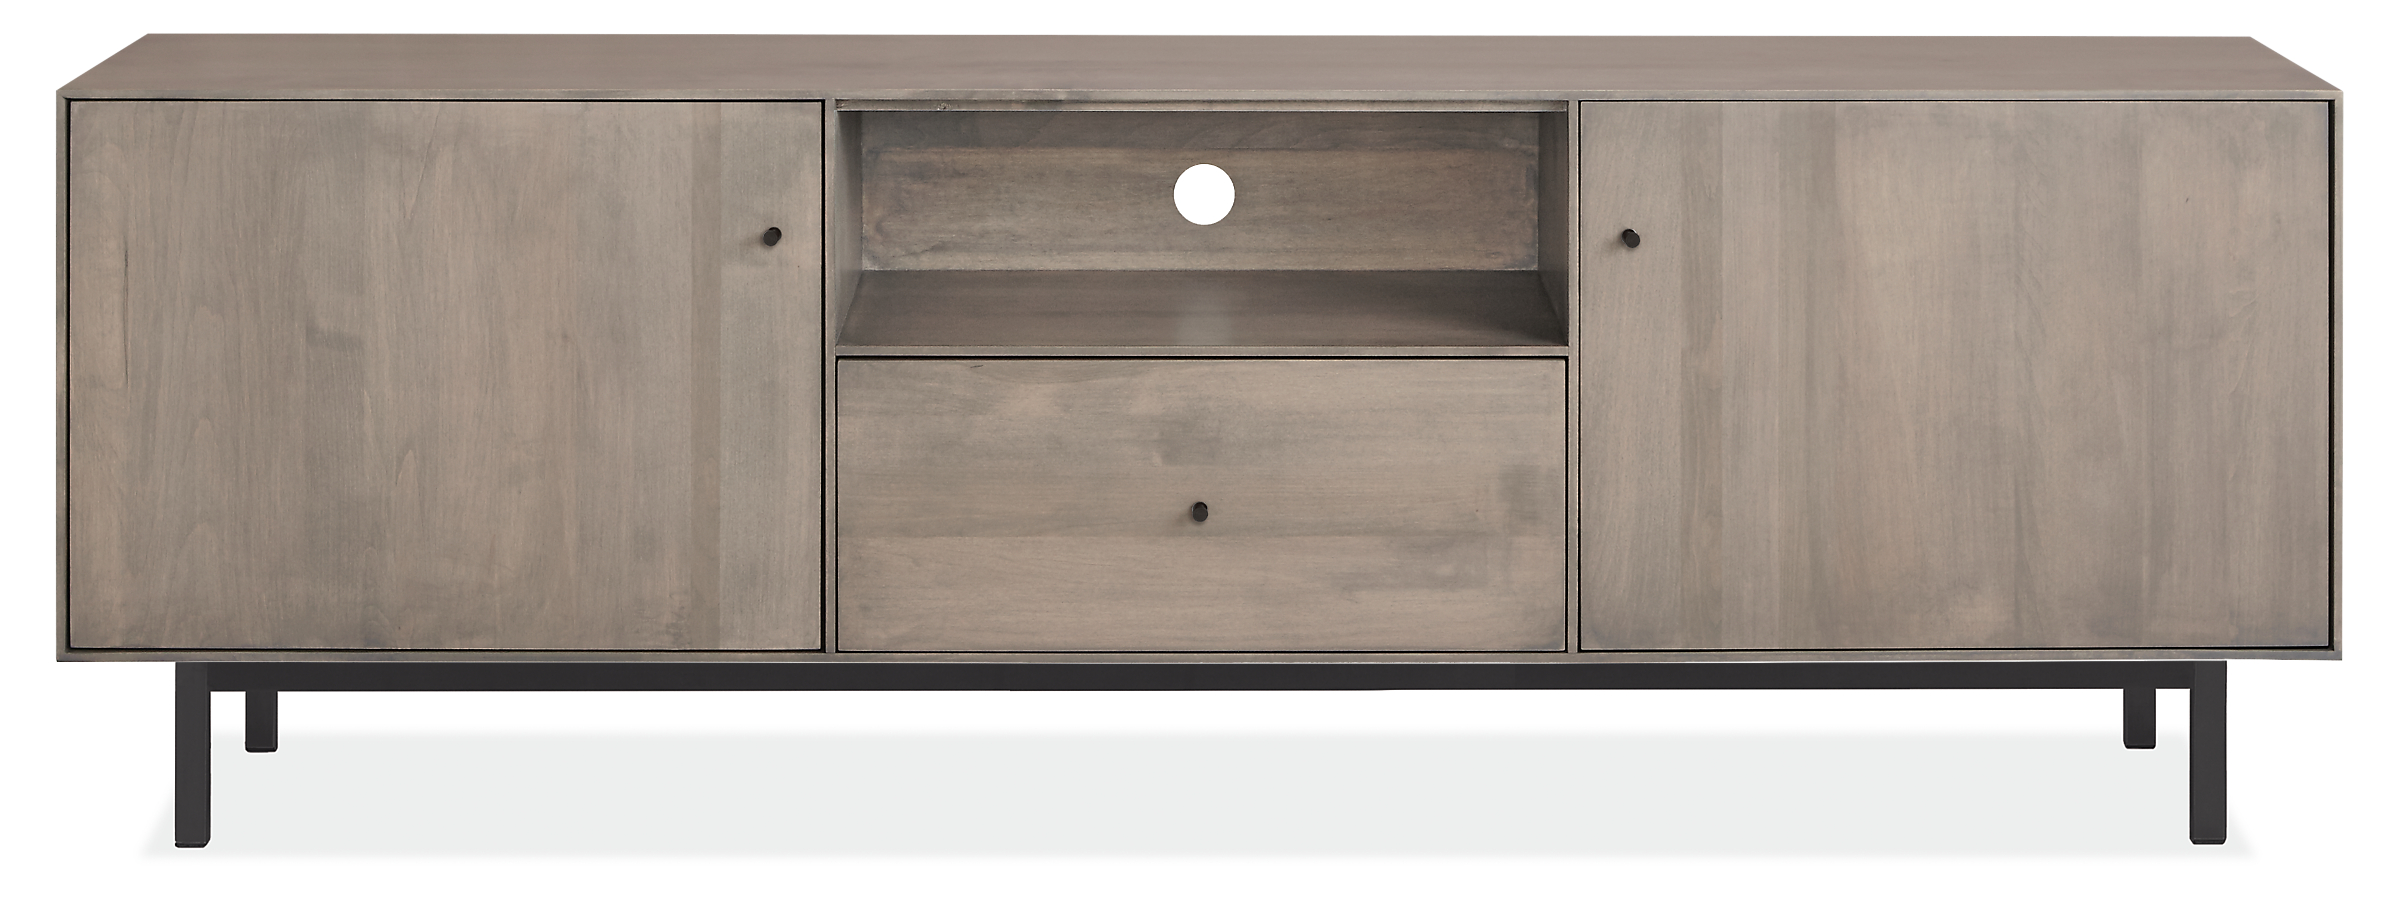 Hudson Media Cabinets with Steel Base